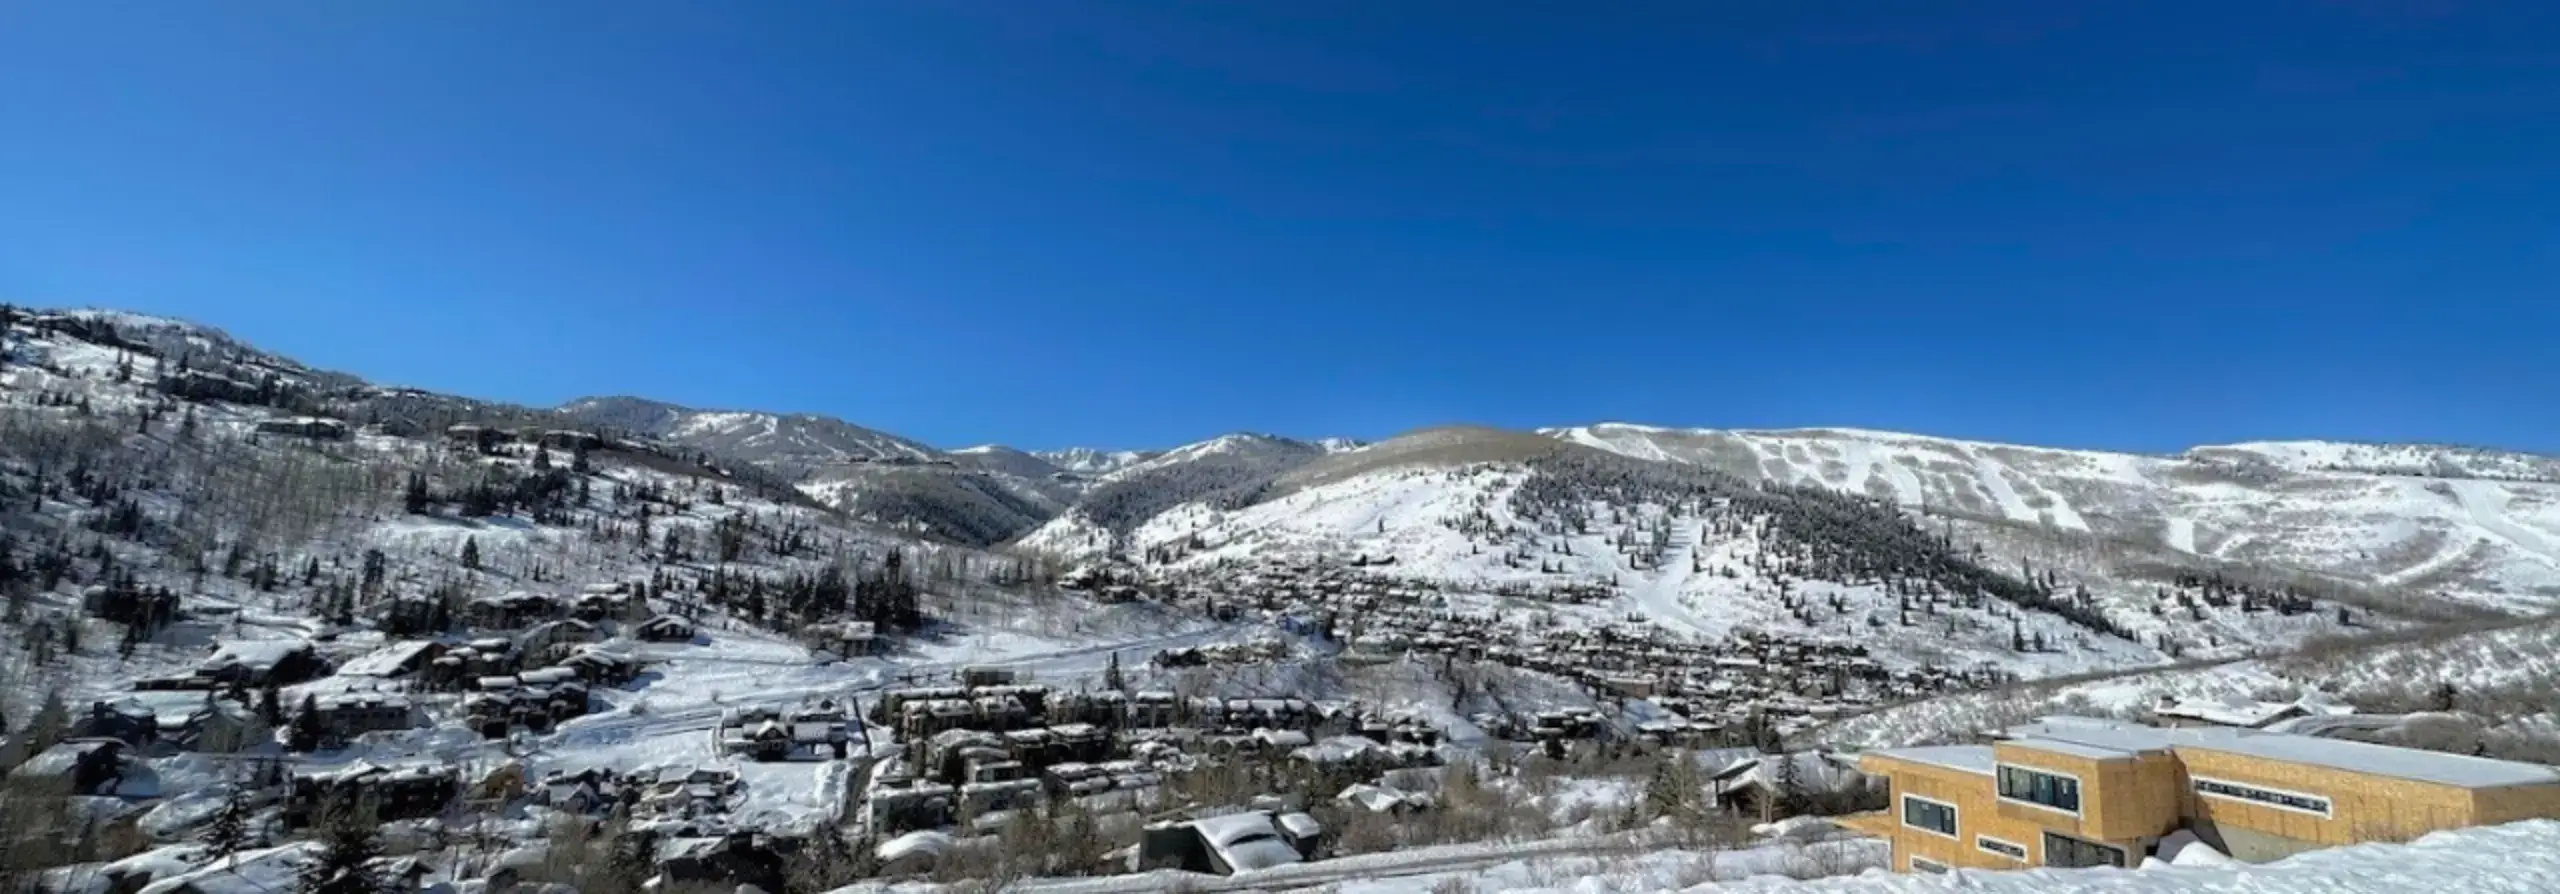 Scenic view of Park City and surrounding mountains from Aerie neighborhood